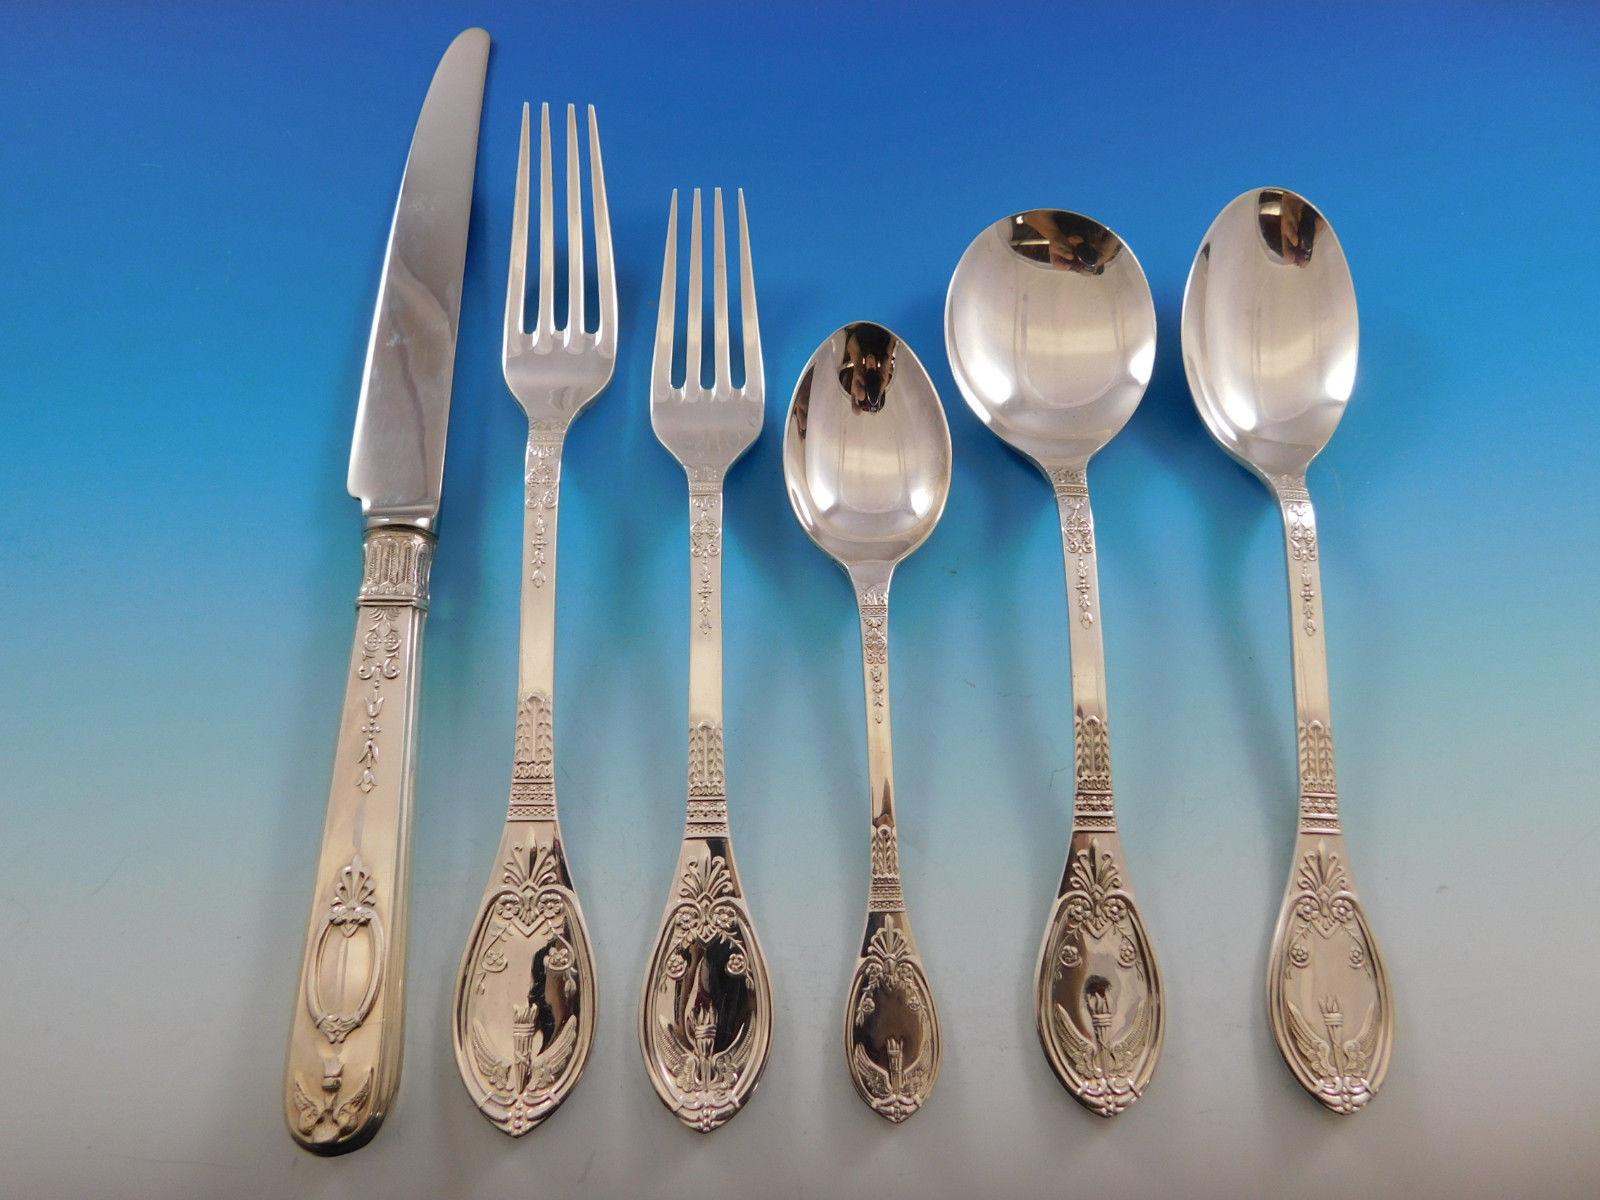 Outstanding dinner size chateau by Carrs or Sheffield (England) sterling silver flatware set, 41 pieces. This set includes:

Six Dinner Size Knives, 10 1/8